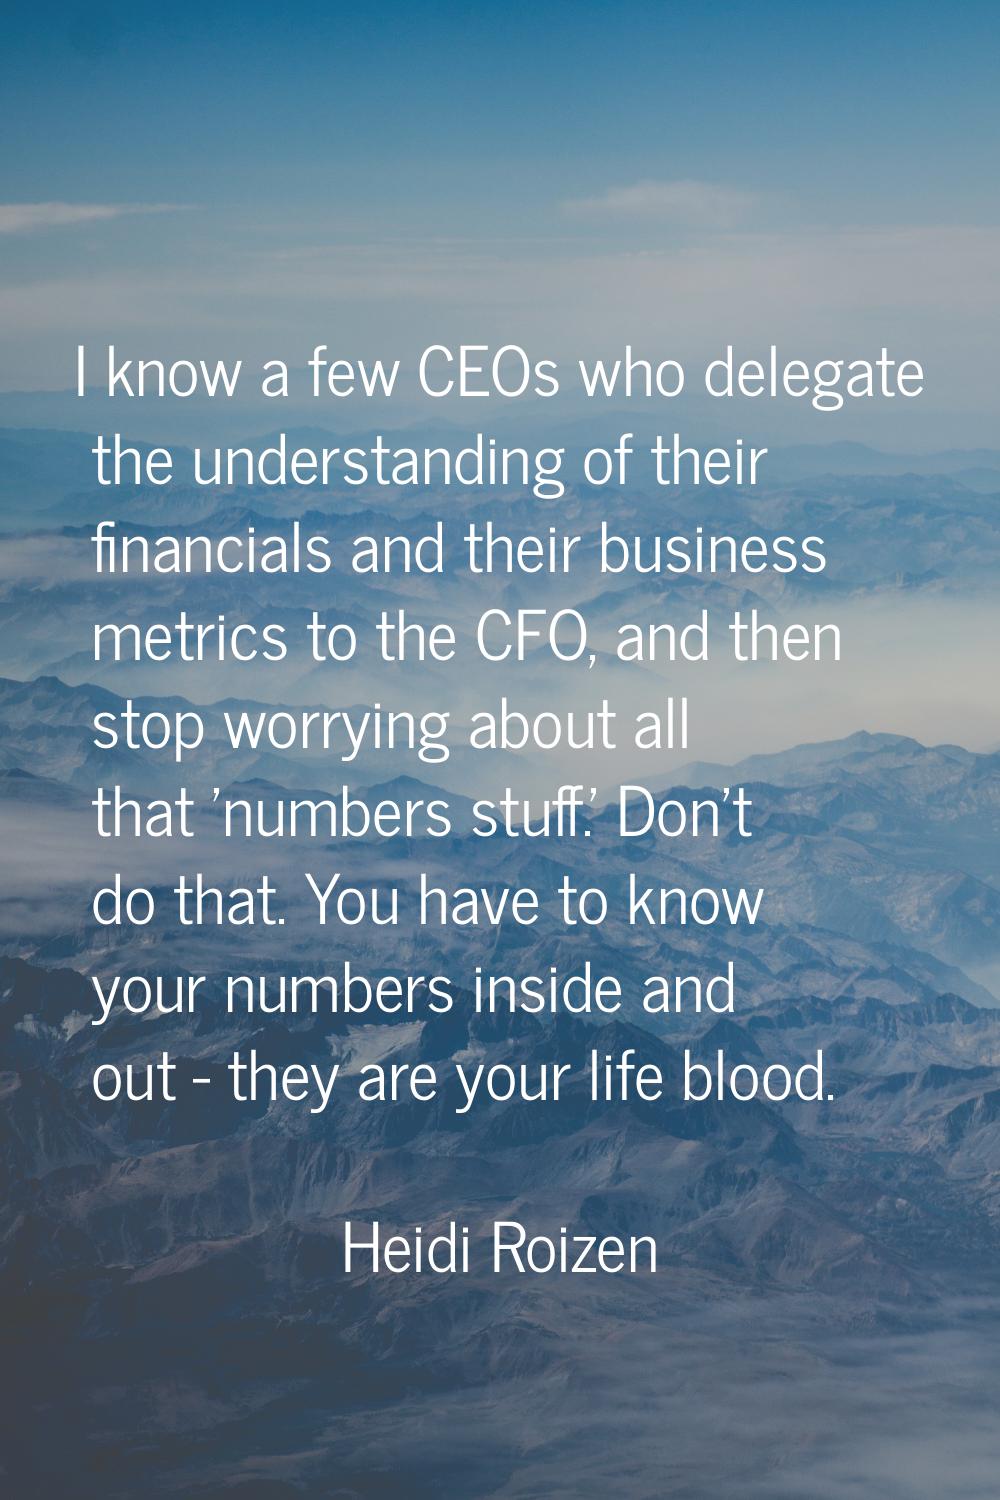 I know a few CEOs who delegate the understanding of their financials and their business metrics to 